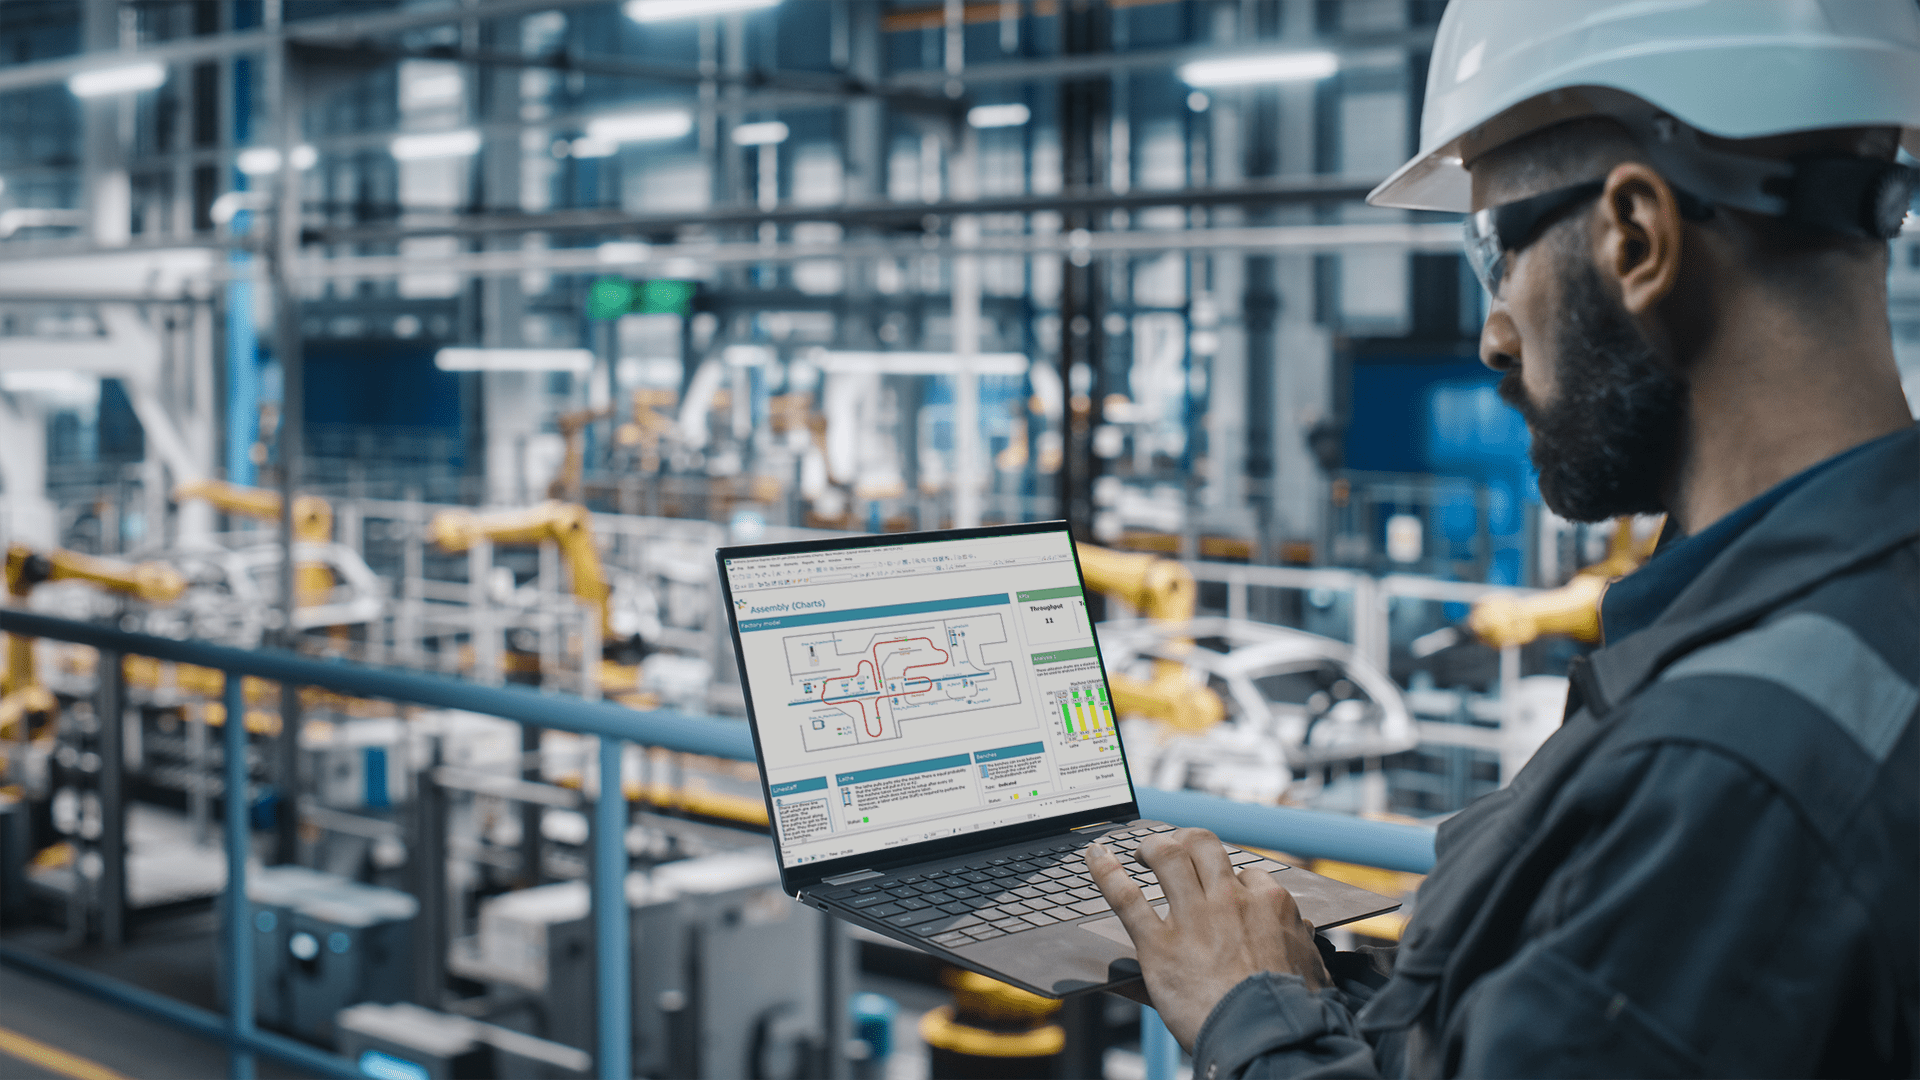 A plant manager uses Twinn Witness predictive simulation software while overseeing manufacturing operations